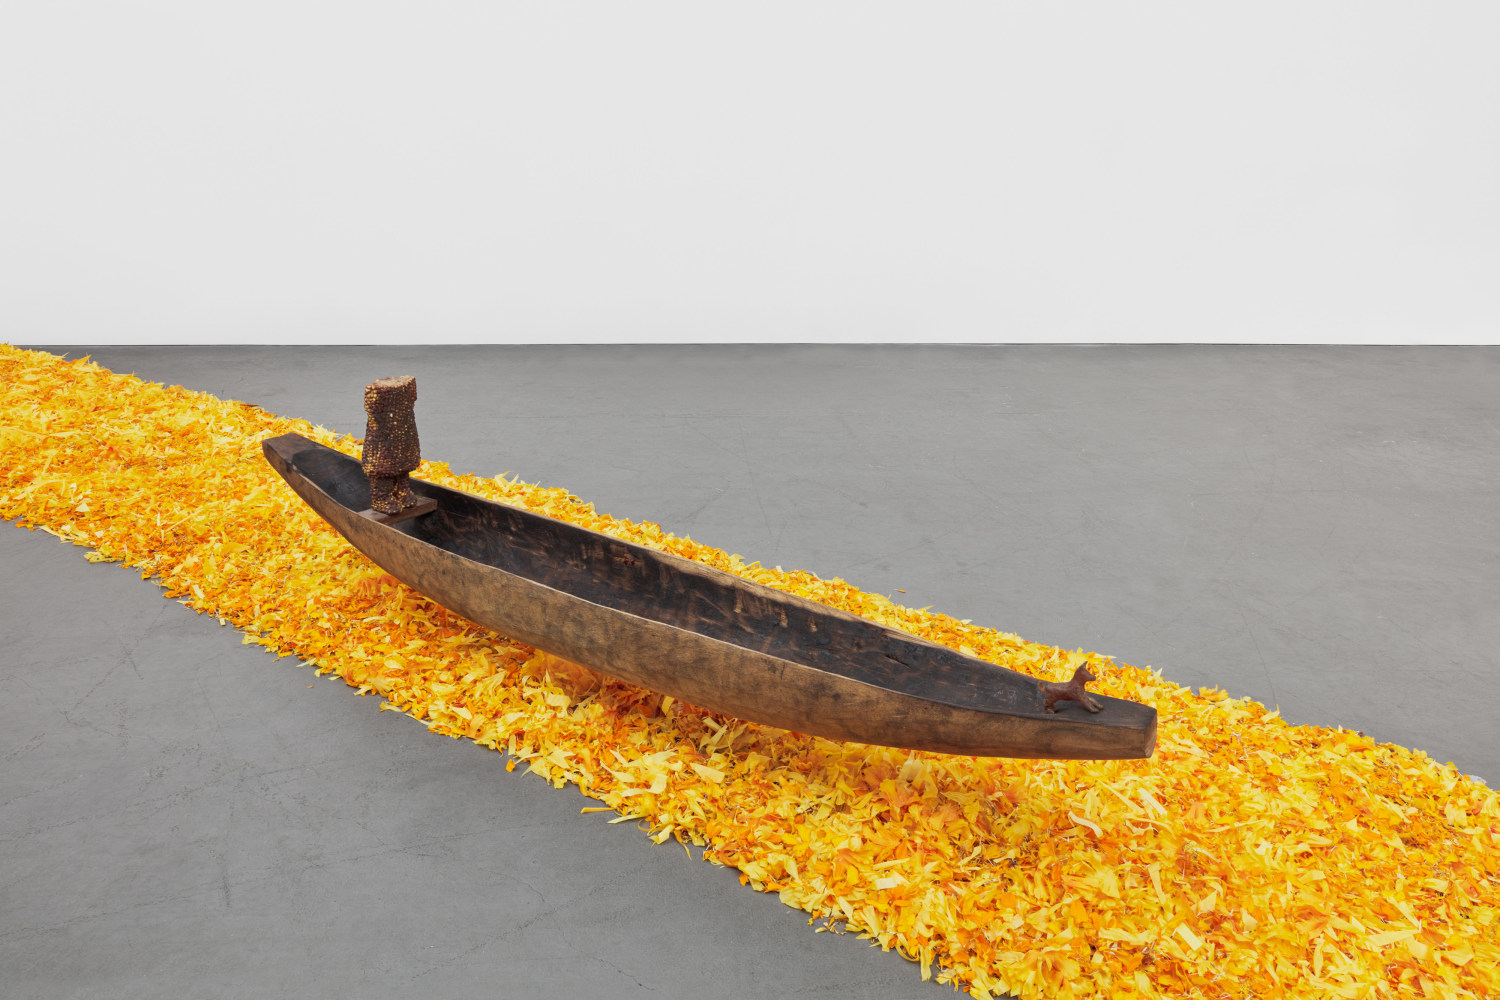 A wooden canoe with a headless figure made of corn and a small wax dog floats above a river of marigolds.